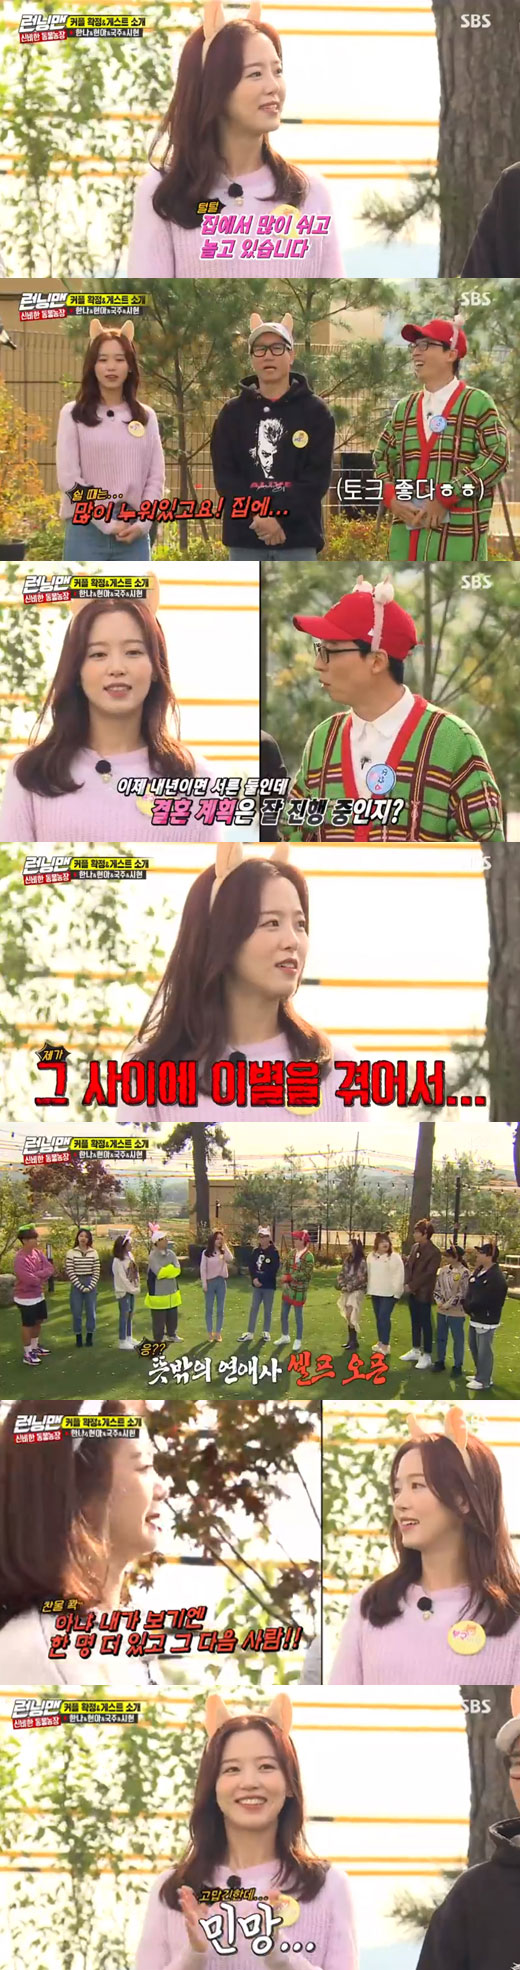 Actor Kang Hanna showed the true story of Gaming Goddess with full excitement with honest and cool talk in Running Man.In the SBS entertainment program Running Man broadcasted on the last 10 days, he attracted attention with his cool farewell testimony.Yoo Jae-Suk told Kang Hanna, who appeared again in Running Man in a year or so, I have been actively appearing and actively appearing in dramas.Kang Hanna said, Now I am very active at home.When Yoo Jae-Suk said, What are you doing during the break? Kanghana boasted of the wrong charm, saying, I think I should buy a cervical pillow because I am lying so much.Also, Yoo Jae-Suk asked, Mr Hanna once said in an interview that he would interview at the age of thirty-two, is it going?Kang Hanna said, I came out last year and appeared in a year, and I had a breakup in the meantime.The embarrassed Yoo Jae-Suk laughed, wittyly saying, I was not just lying still.Kang Hanna reveals her true value in Mysterious Animal Farm raceHe transformed into an Arctic fox who came to enjoy the feast of Animal Farm and continued the race with Ji Seok-jin.Especially in the first half-screened song, choreography game Trust me in half, Kang Hanna heard the Bad Girl Good Girl of the group Miss A and said, White Blood?, and showed the wrong side.He then showed Kang Hanna Table Mak Dance, which destroyed the existing choreography and rhythm and made use of his feelings, and laughed at viewers with addictive charm.Kang Hanna, who showed a dance full of excitement, said, I think I did a little well today.He asked the members of Running Man and showed his cuteness with his satisfaction with his dance.As such, Kang Hanna led the race with a brilliant performance between Running Man members and guests, which I can not believe that he appeared in a year.Especially, it boasts a unique charm with a hairy charm, and it is ranked # 1 in real-time search terms.The show showed the charm of Hanna with its unstoppable artistic sense as well as its full excitement, giving the viewers pleasure on weekend evenings.On the other hand, Kang Hanna is meeting viewers every Tuesday on the Olive Chicken Road with the aspect of gourmet schoolboy.